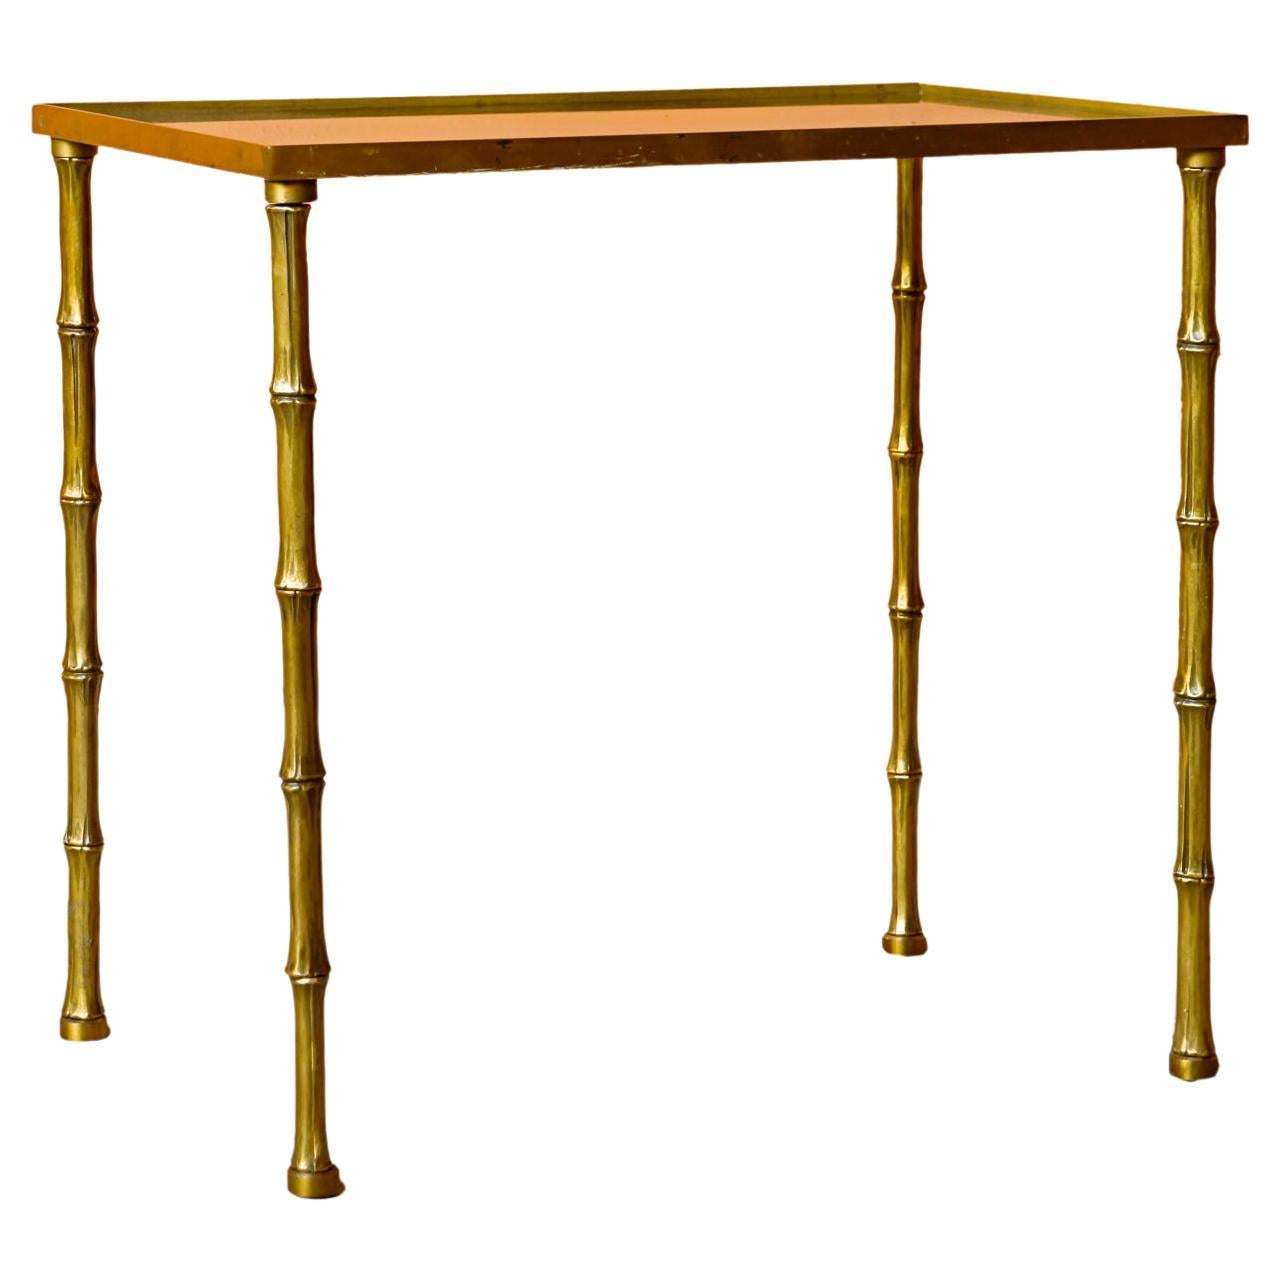 20th Century French Faux Bamboo Bronze Side Table by Maison Bagues